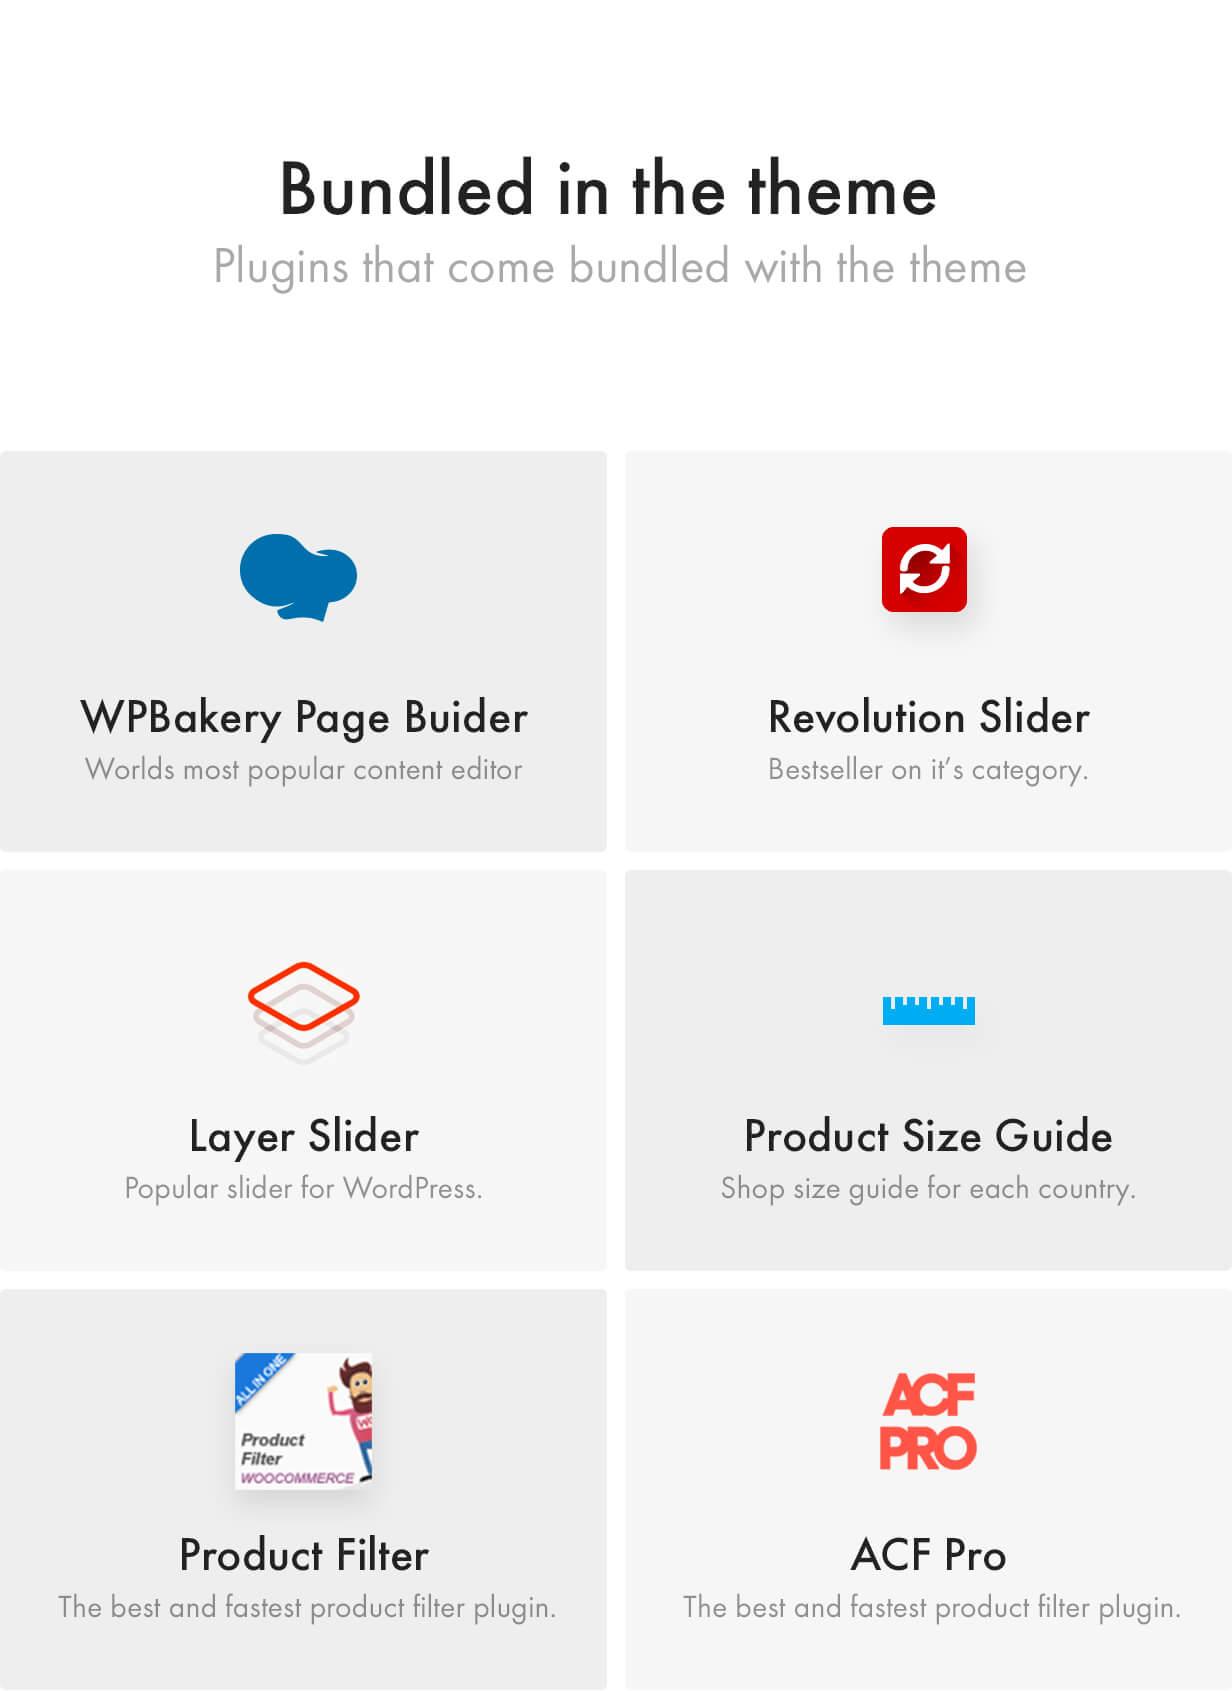 Premium Plugins included, WPBakery Page Builder, Revolution Slider, Layer Slider, Advanced Custom Fields PRO, Product Size Guide, WooCommerce Size Guide